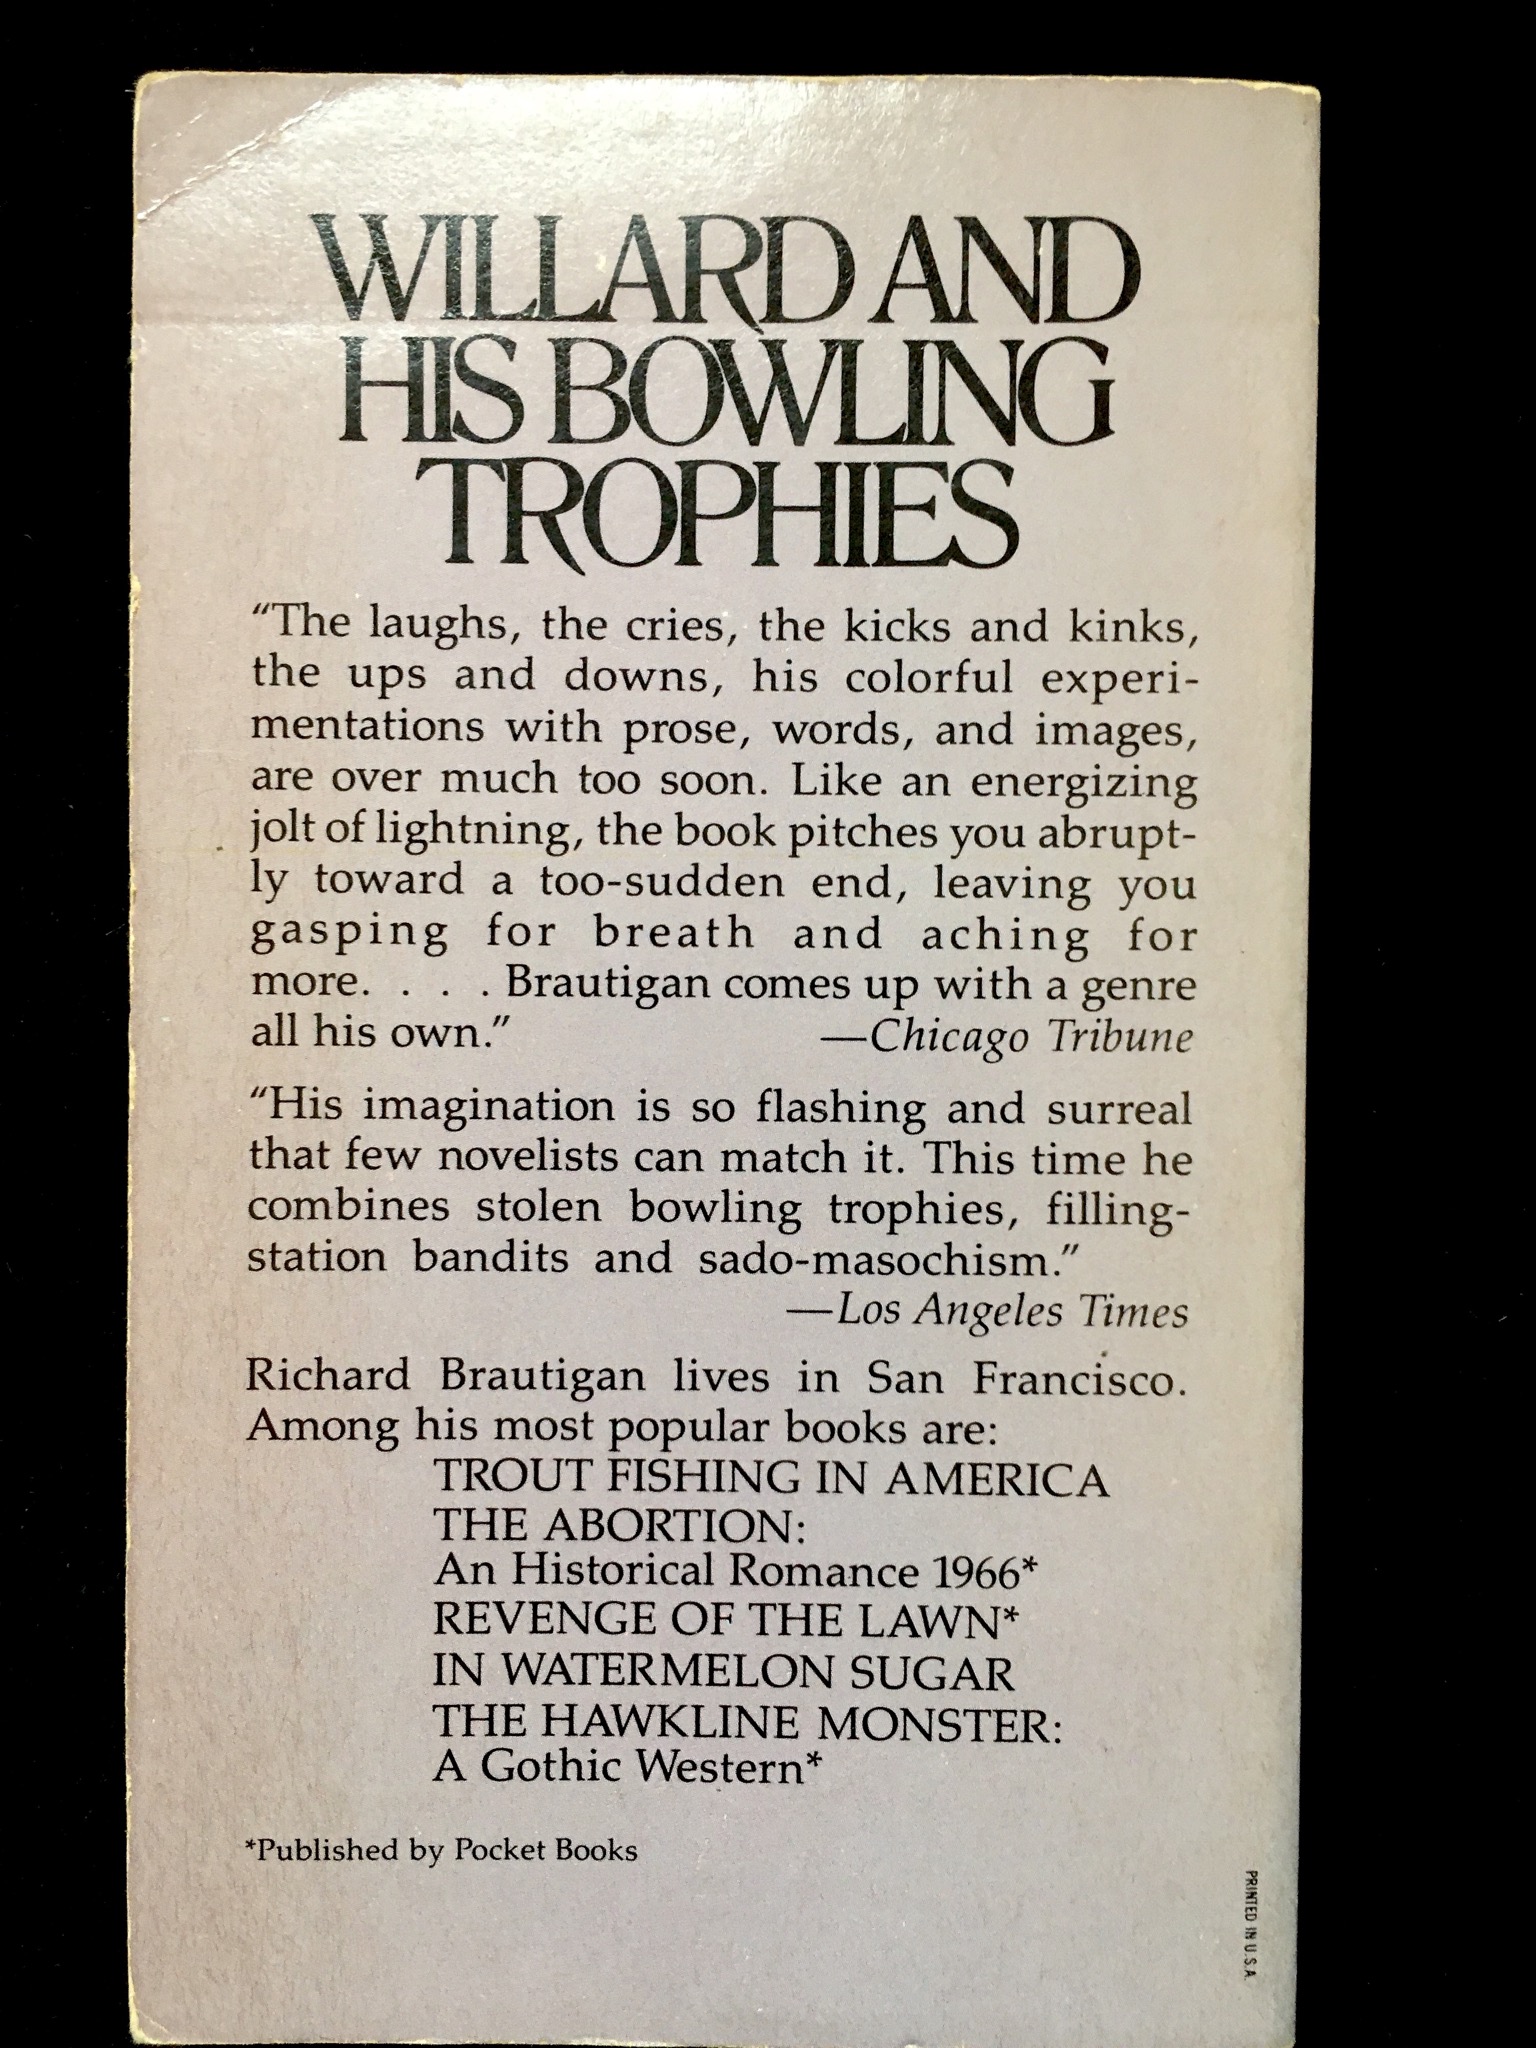 Willard and His Bowling Trophies: A Perverse Mystery by Richard Brautigan